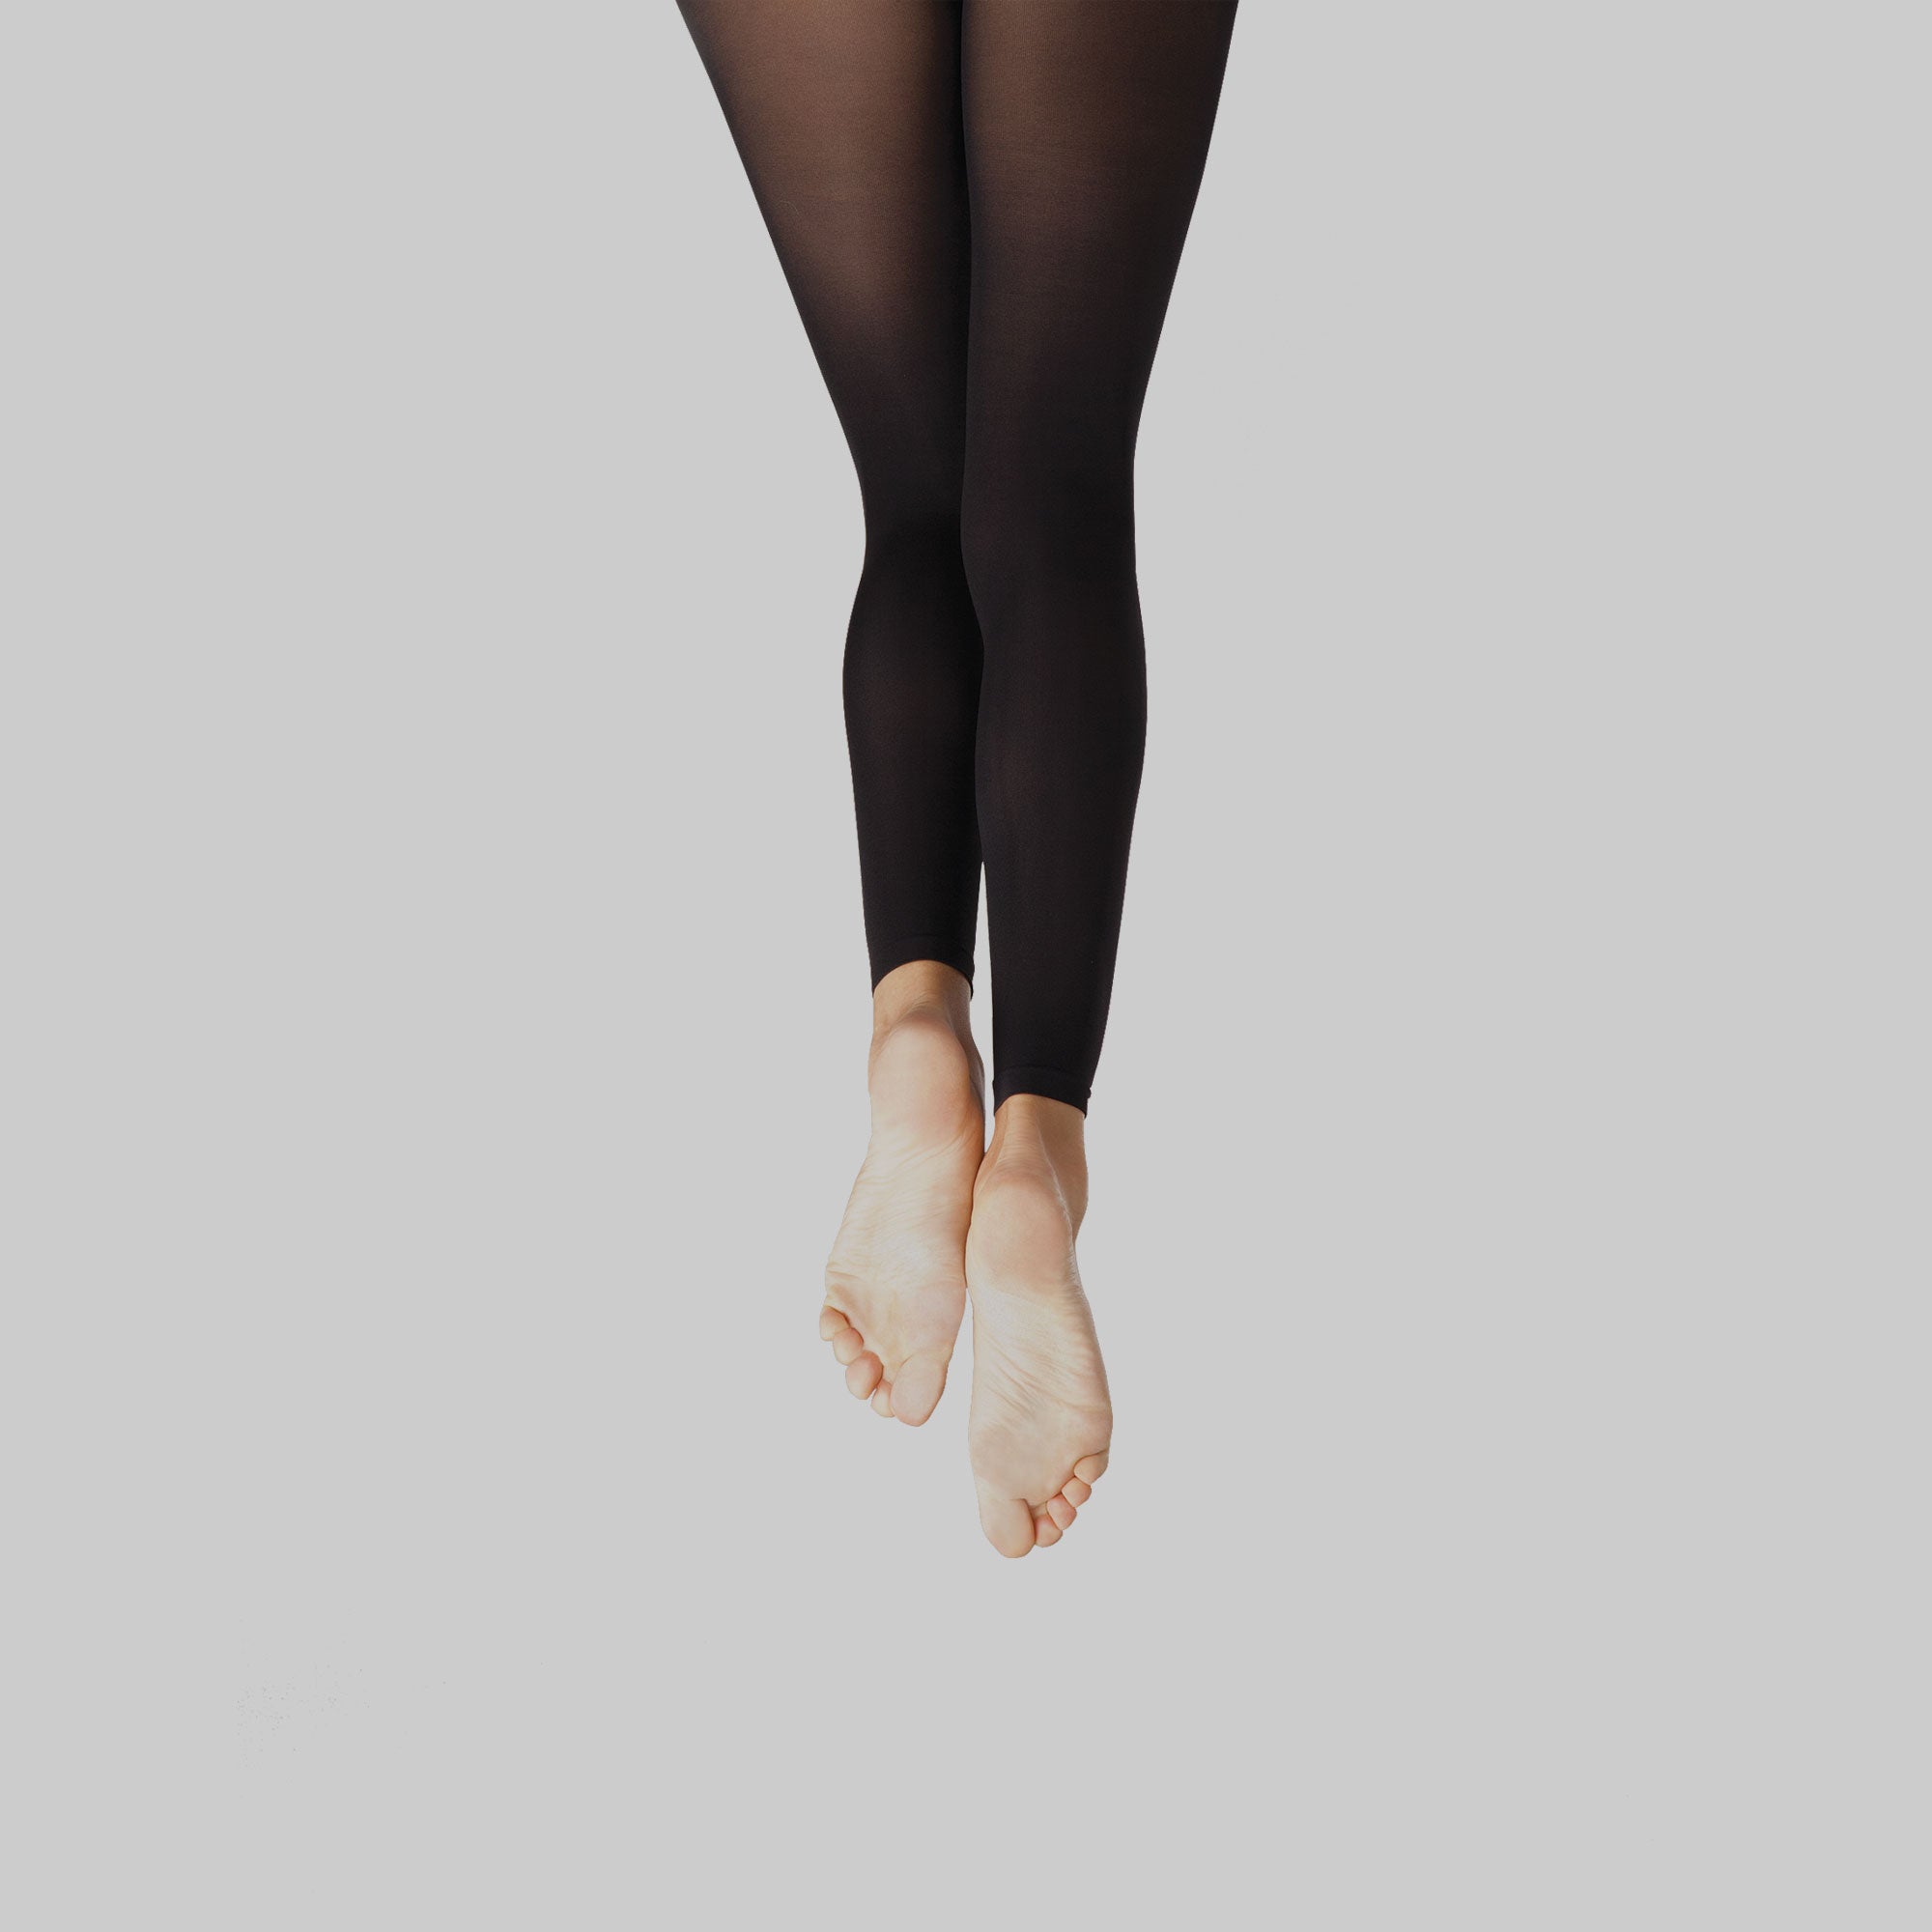 A33 Womens Total Stretch Footless Tights (Large/X-Large - Suntan)